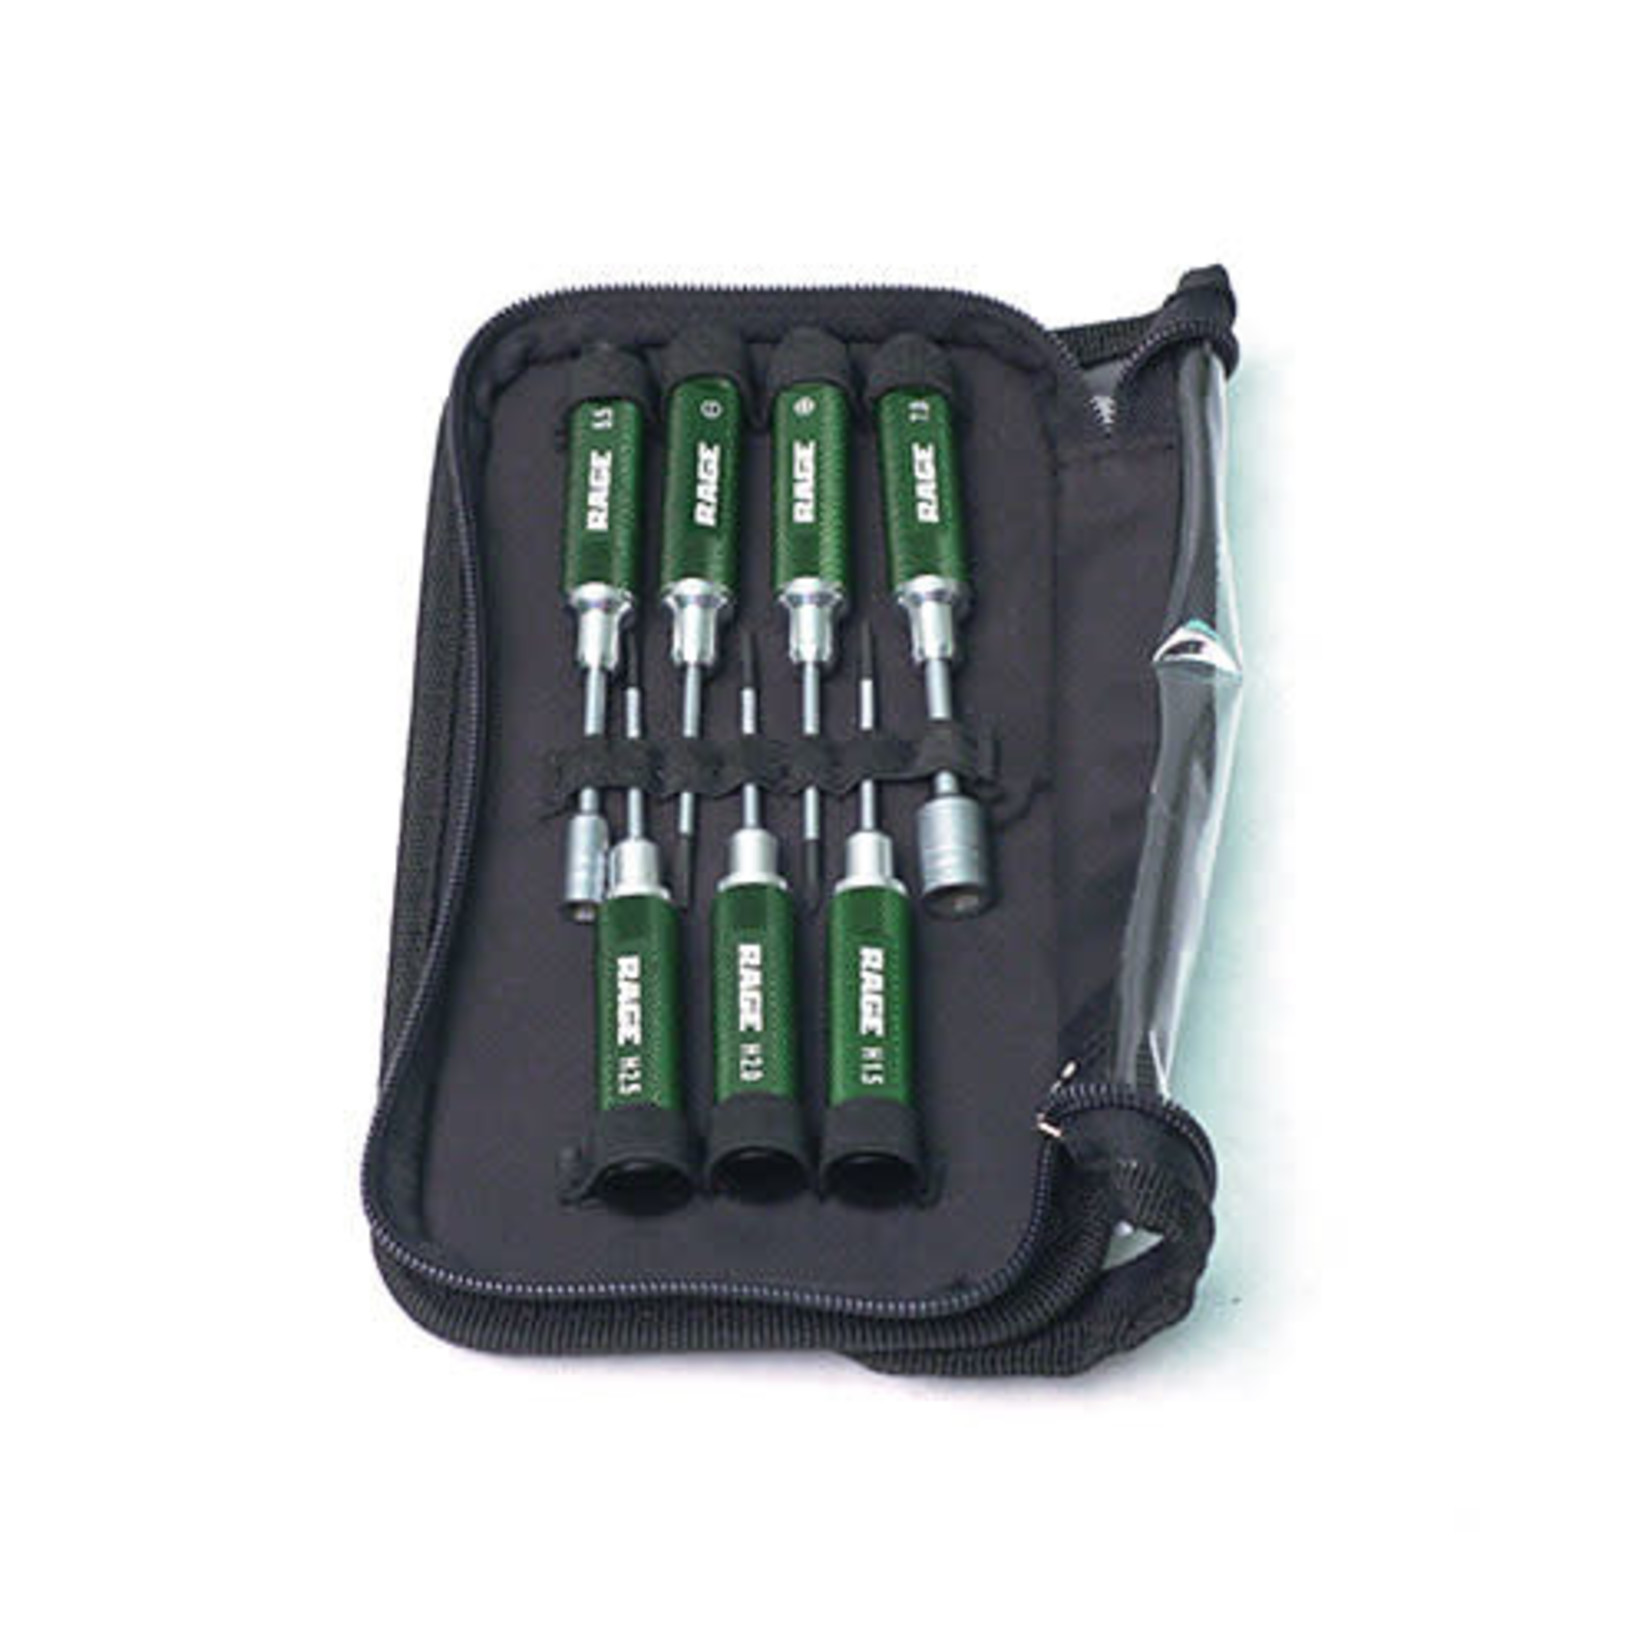 Rage RC Rage RC Compact 7 Piece Machined Tool Set with Case #RGR1500